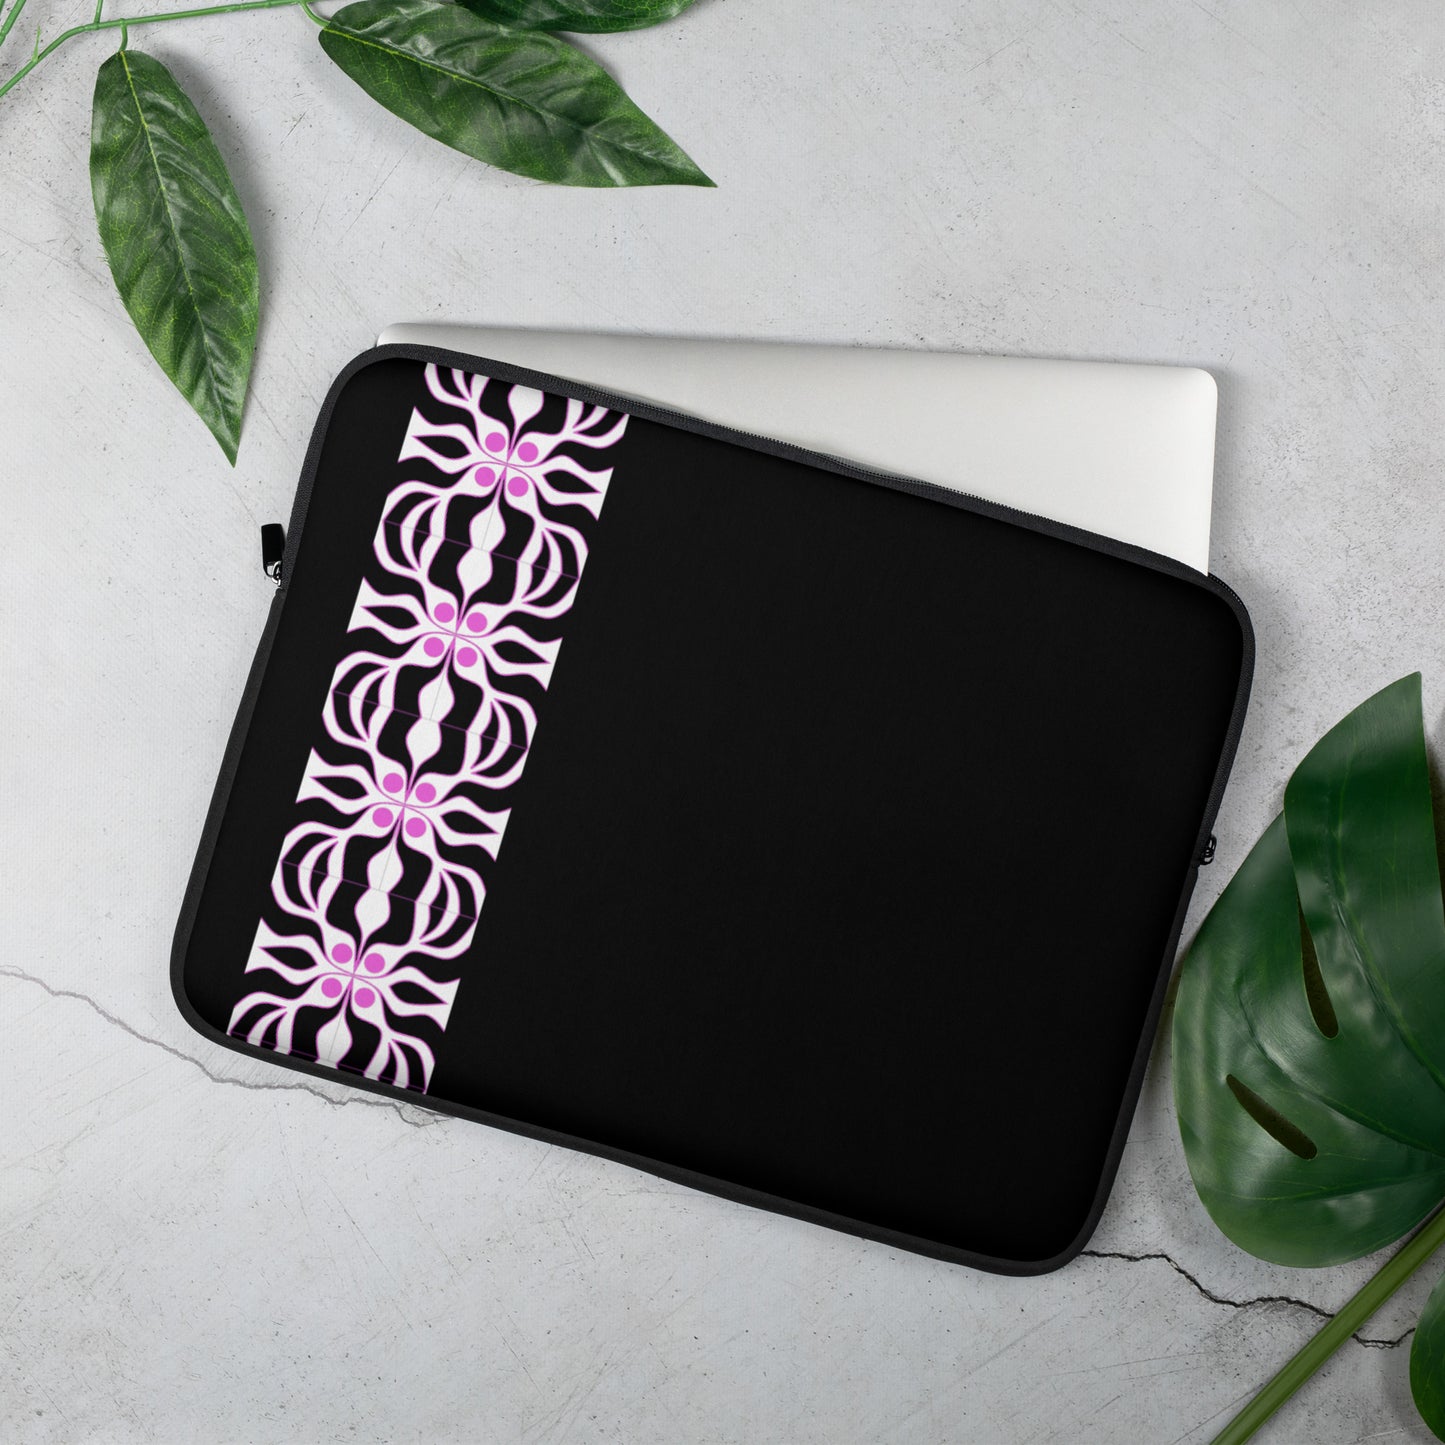 Laptop Sleeve with black and purple print